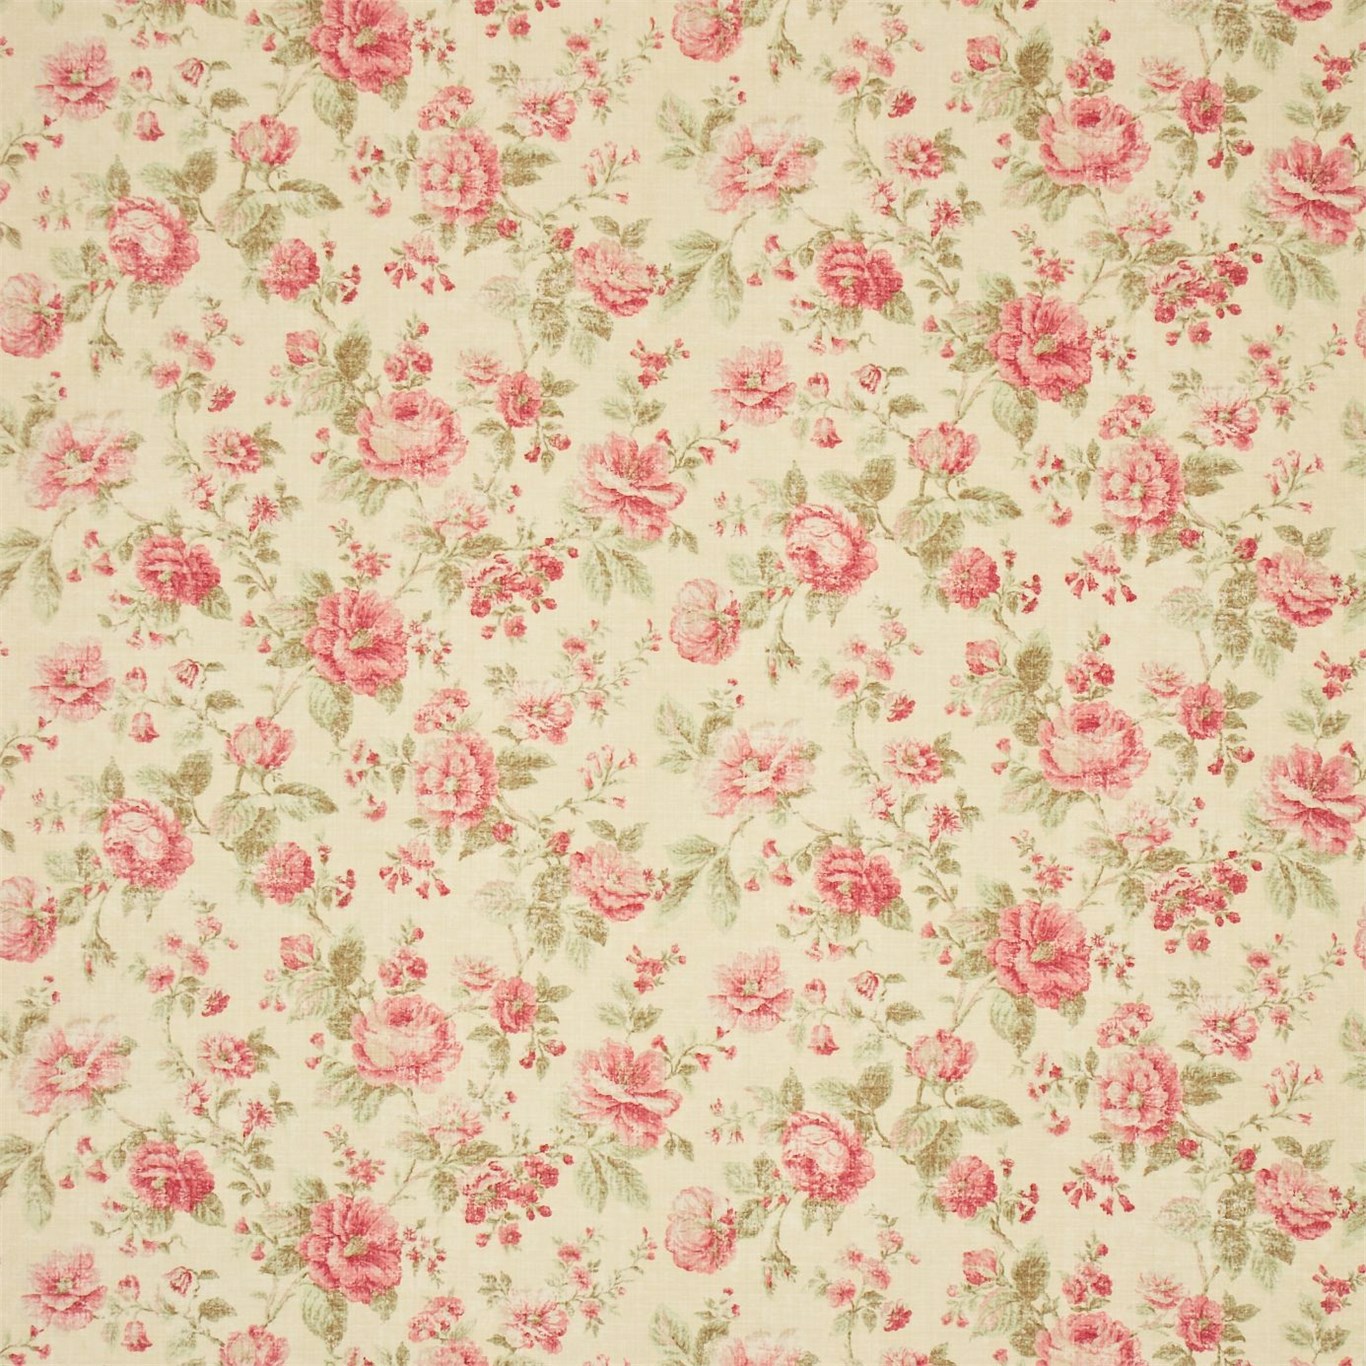 Reminiscence Cream/Red Fabric by SAN